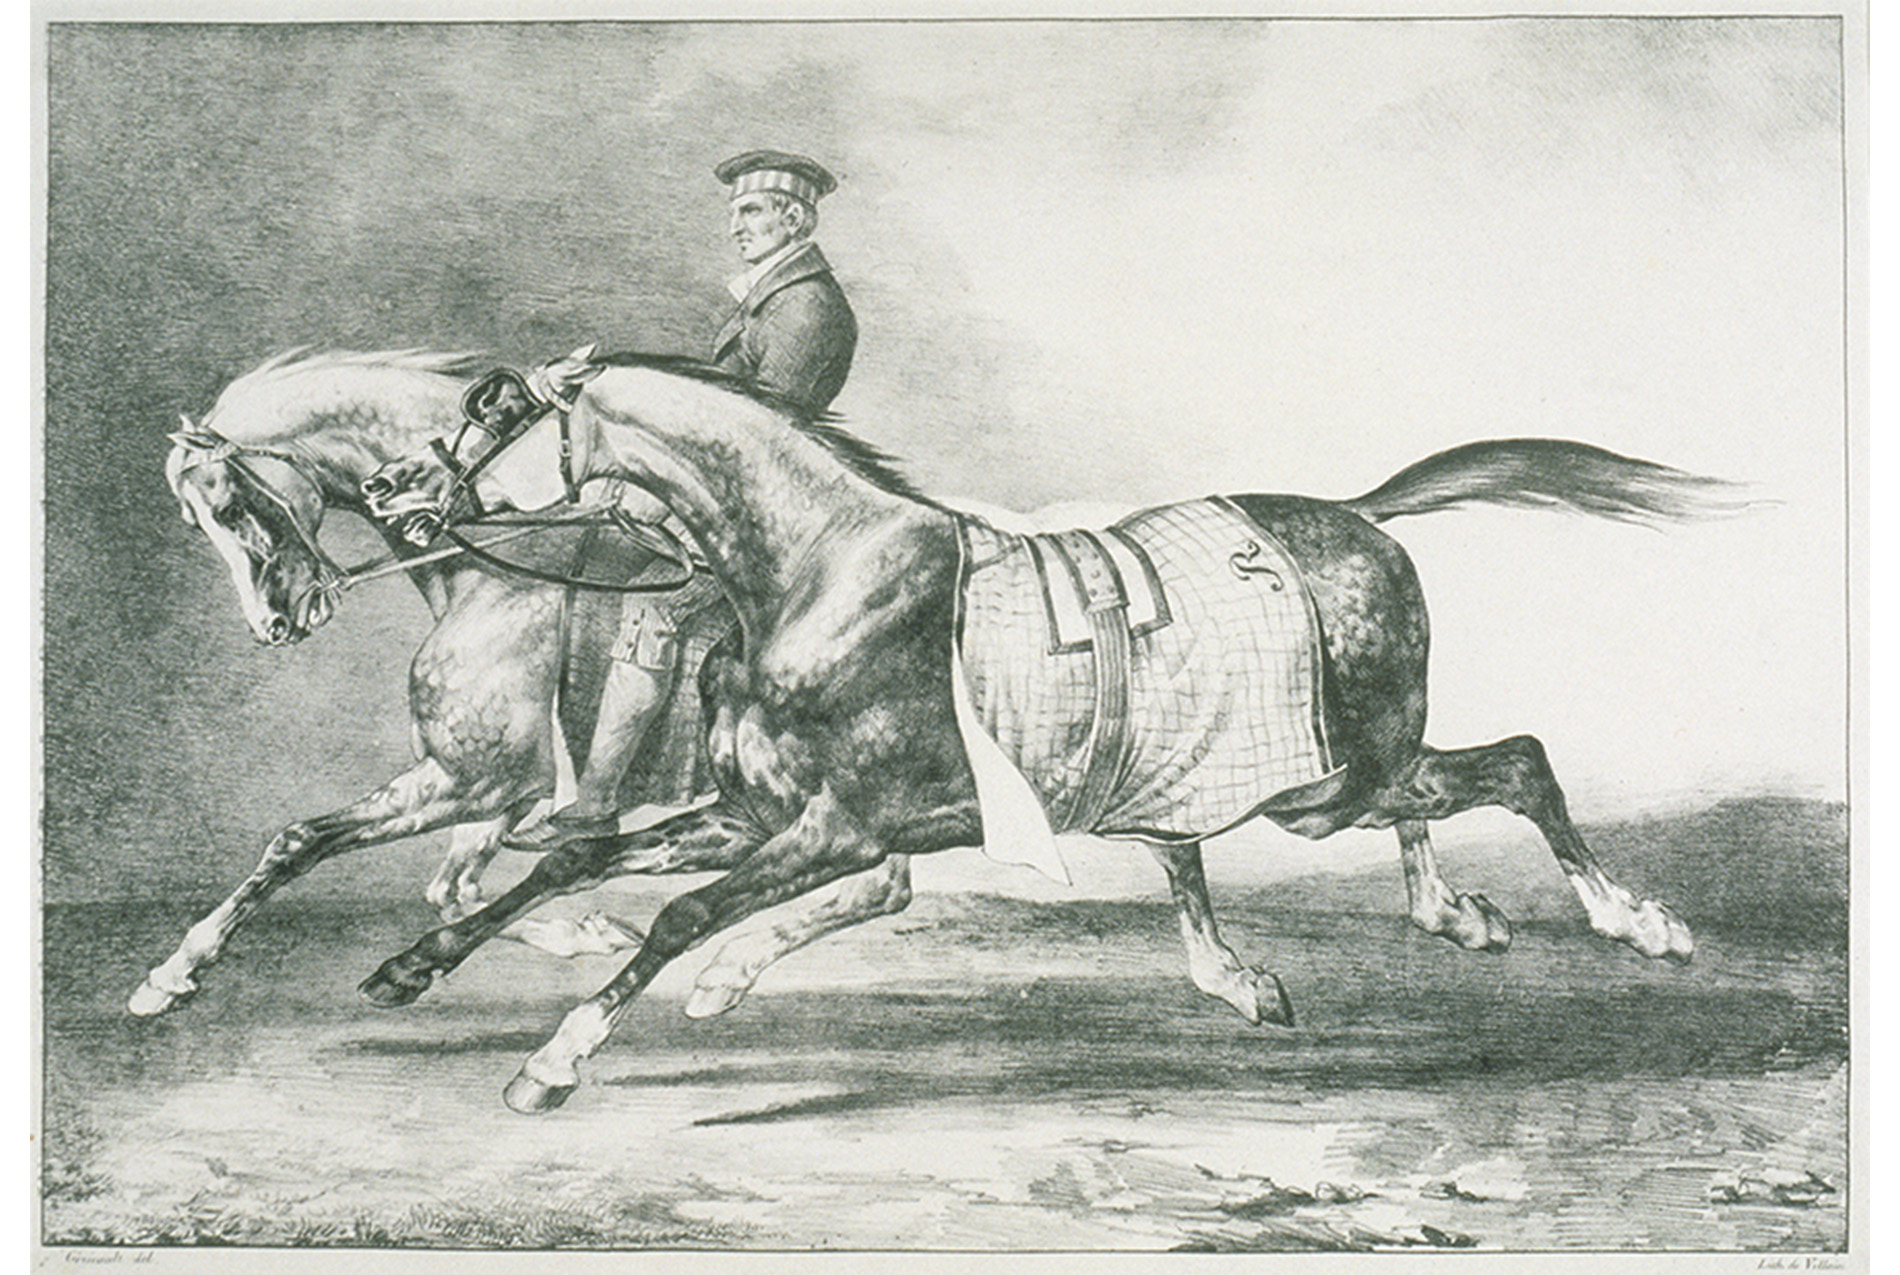 profile view of man riding a horse. another horse runs next to them